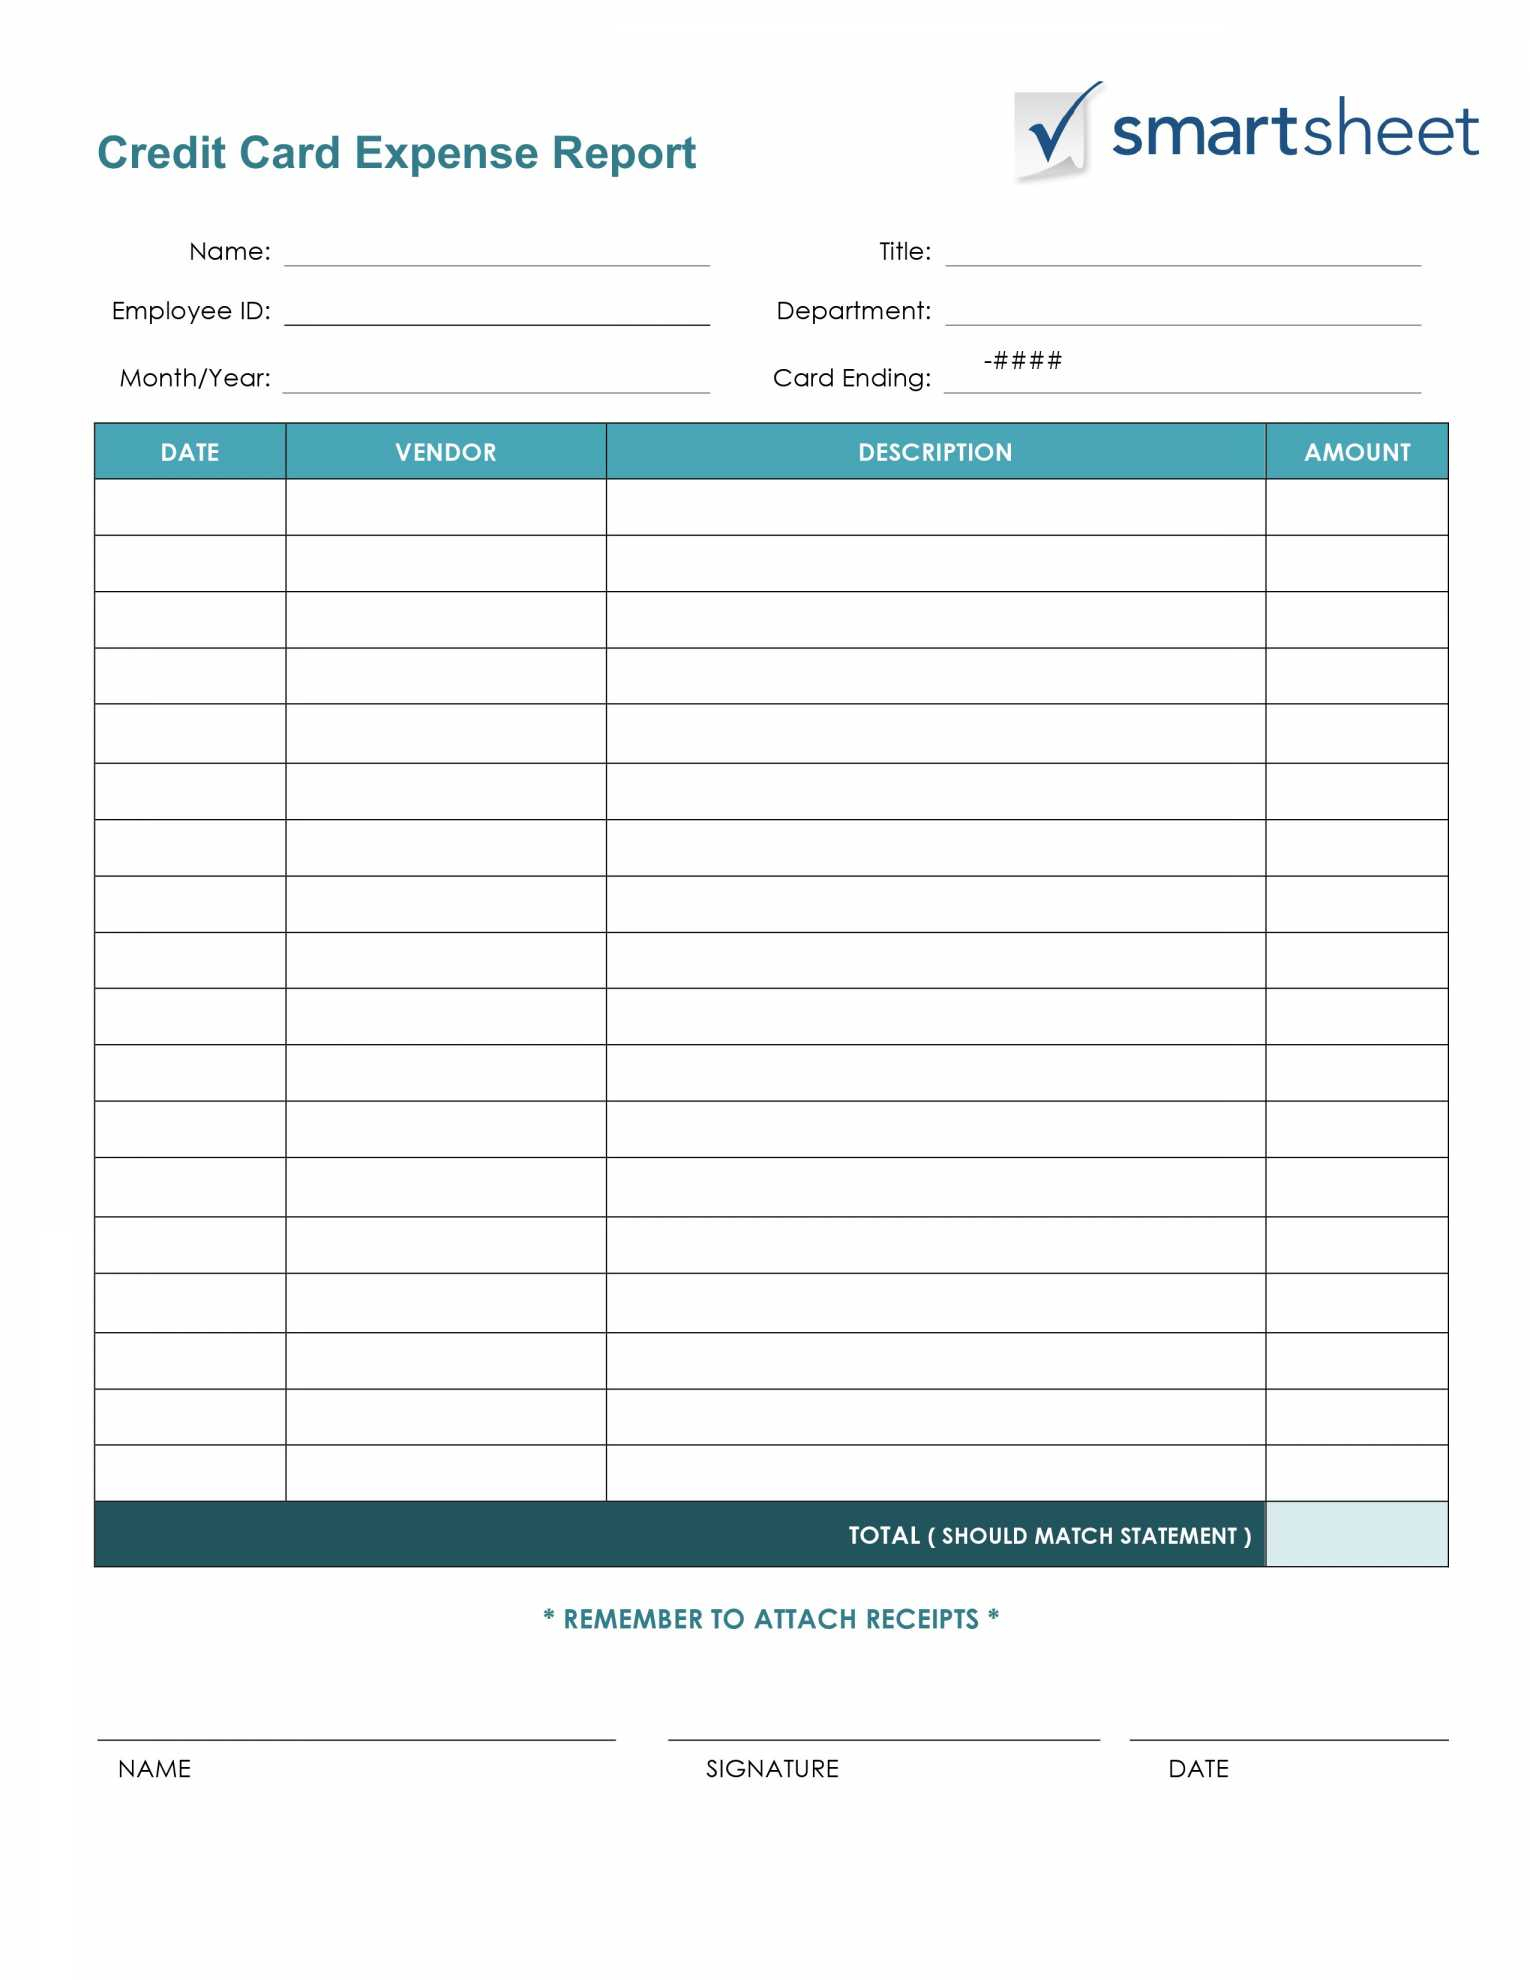 Funeral Budget Spreadsheet Intended For Business Expenses Form Template Free Expense Report Funeral Bill